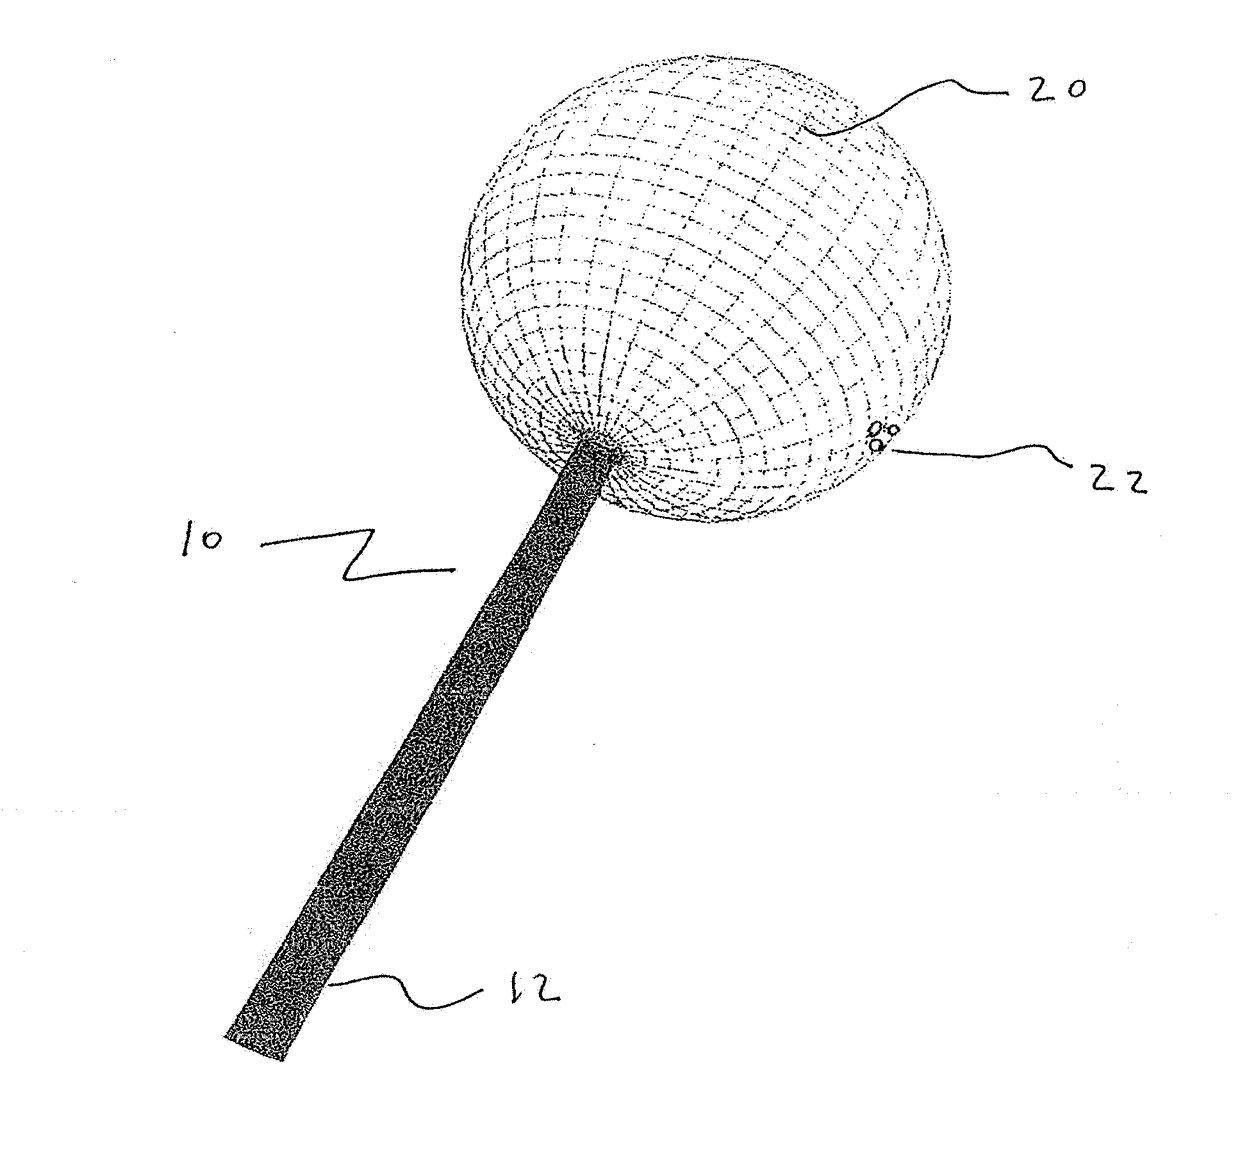 Alternative use for hydrogel intrasaccular occlusion device with an umbrella member for structural support